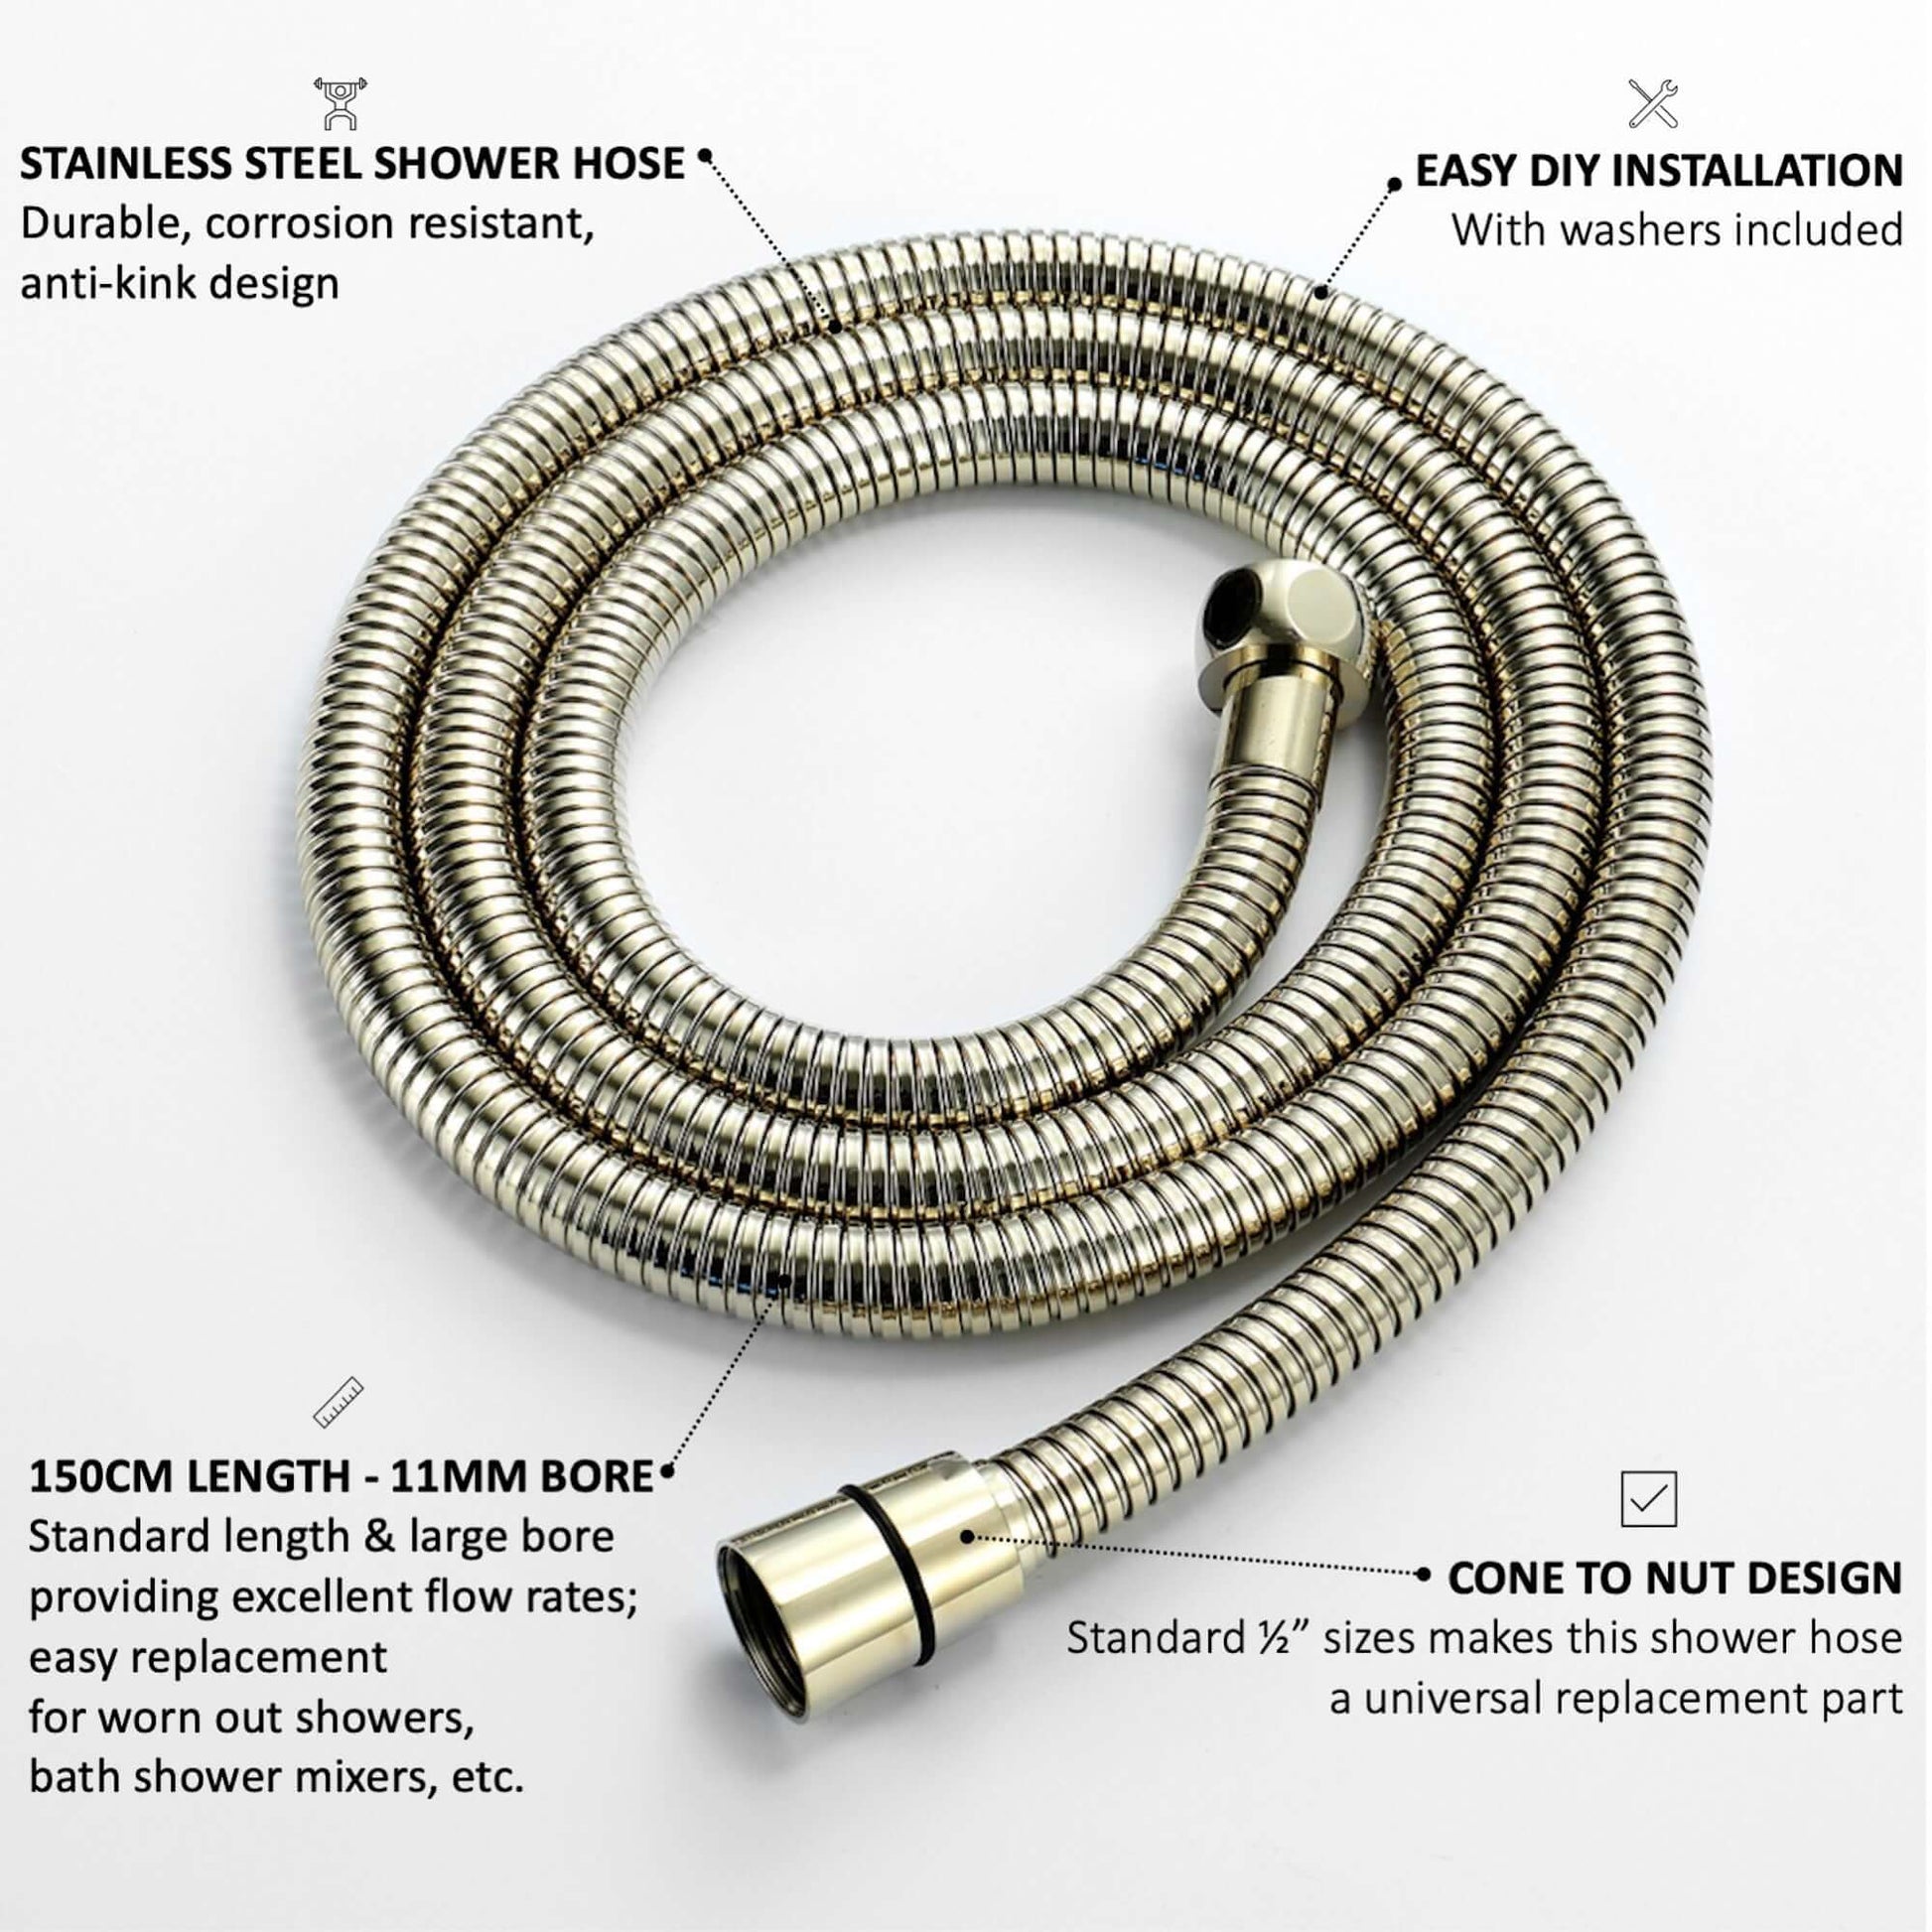 Flex shower hose stainless steel 1.5m large bore - English gold - Showers